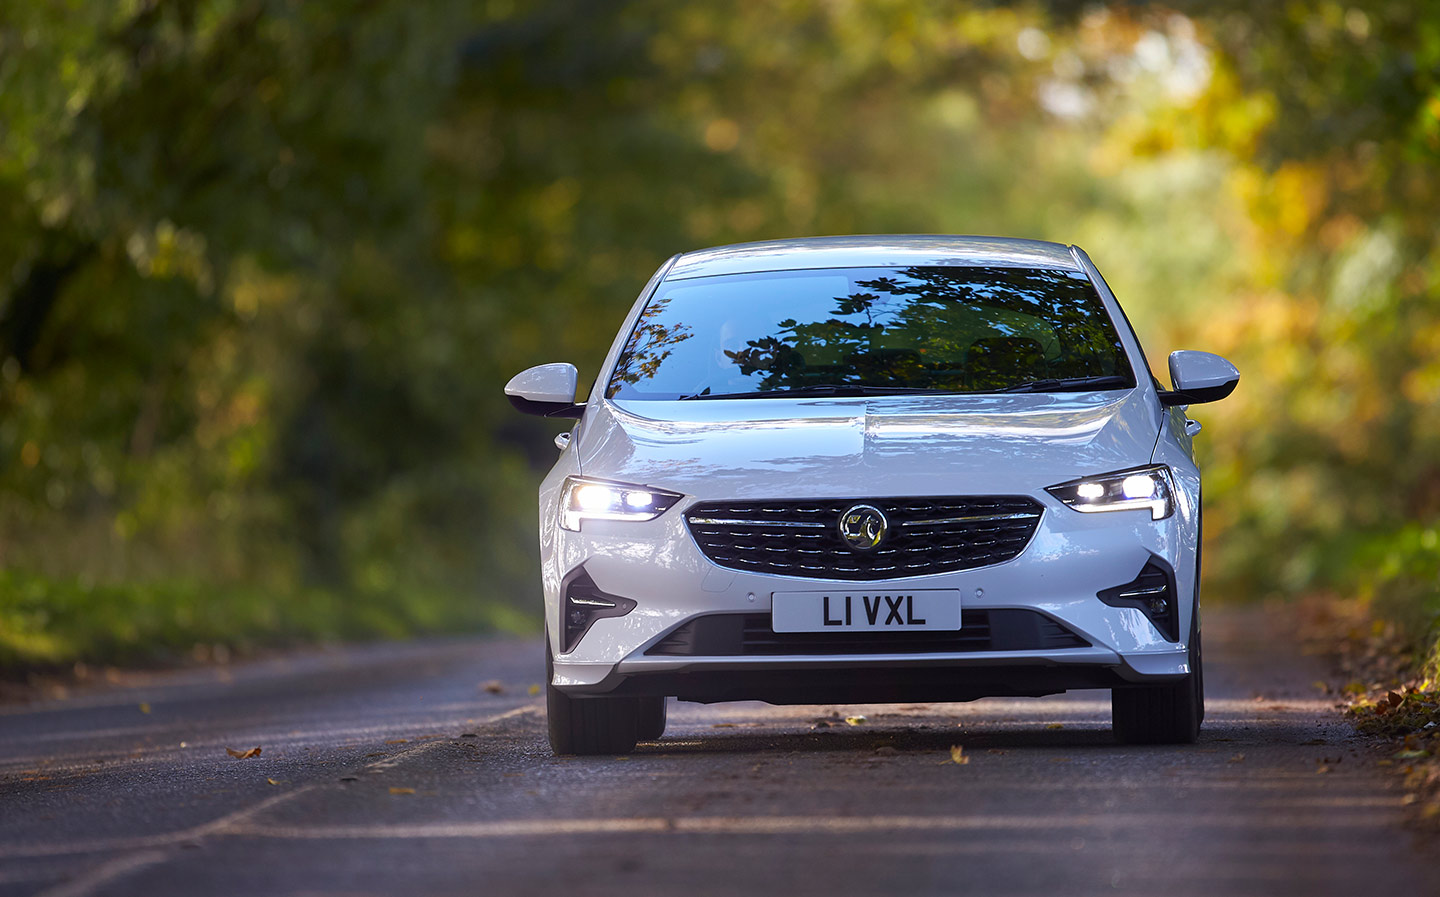 2021 Vauxhall Insignia review by Will Dron for Sunday Times Driving.co.uk